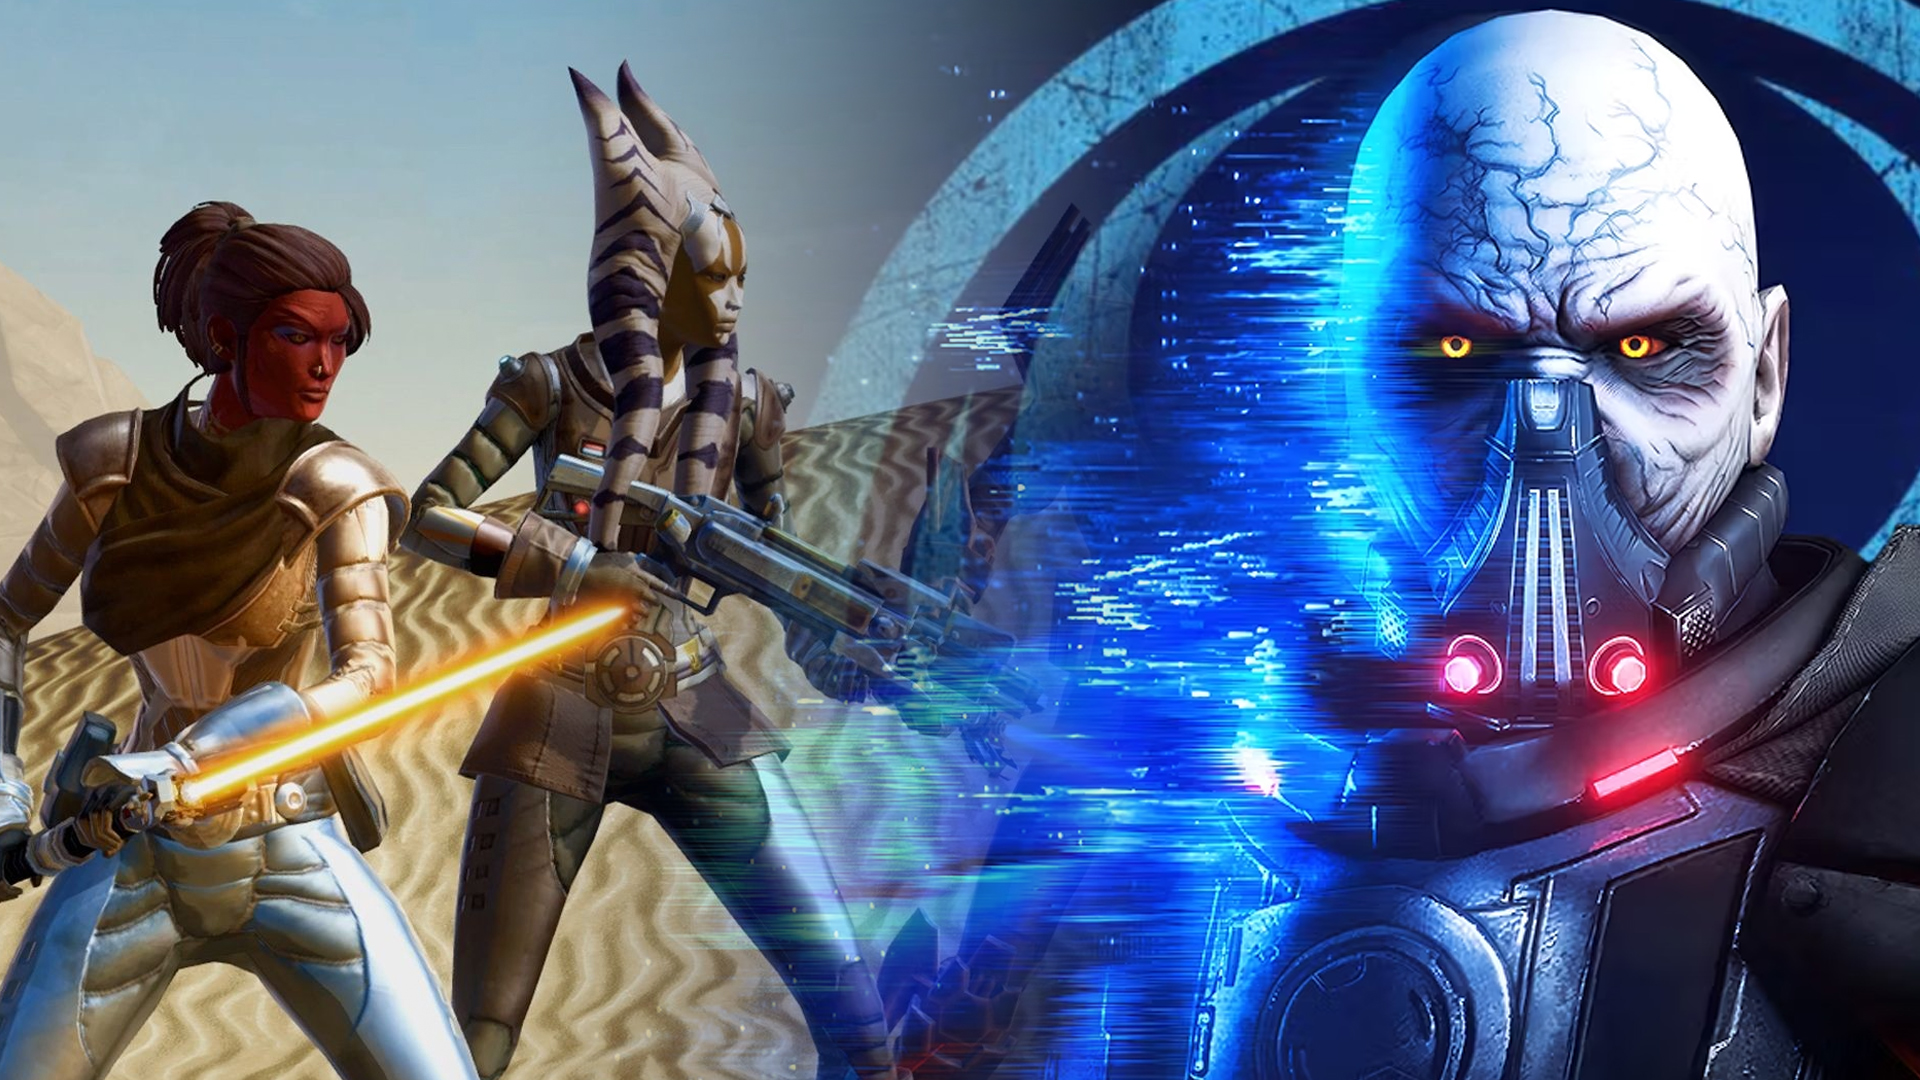 Star wars the knight of the old republic русификатор steam фото 21